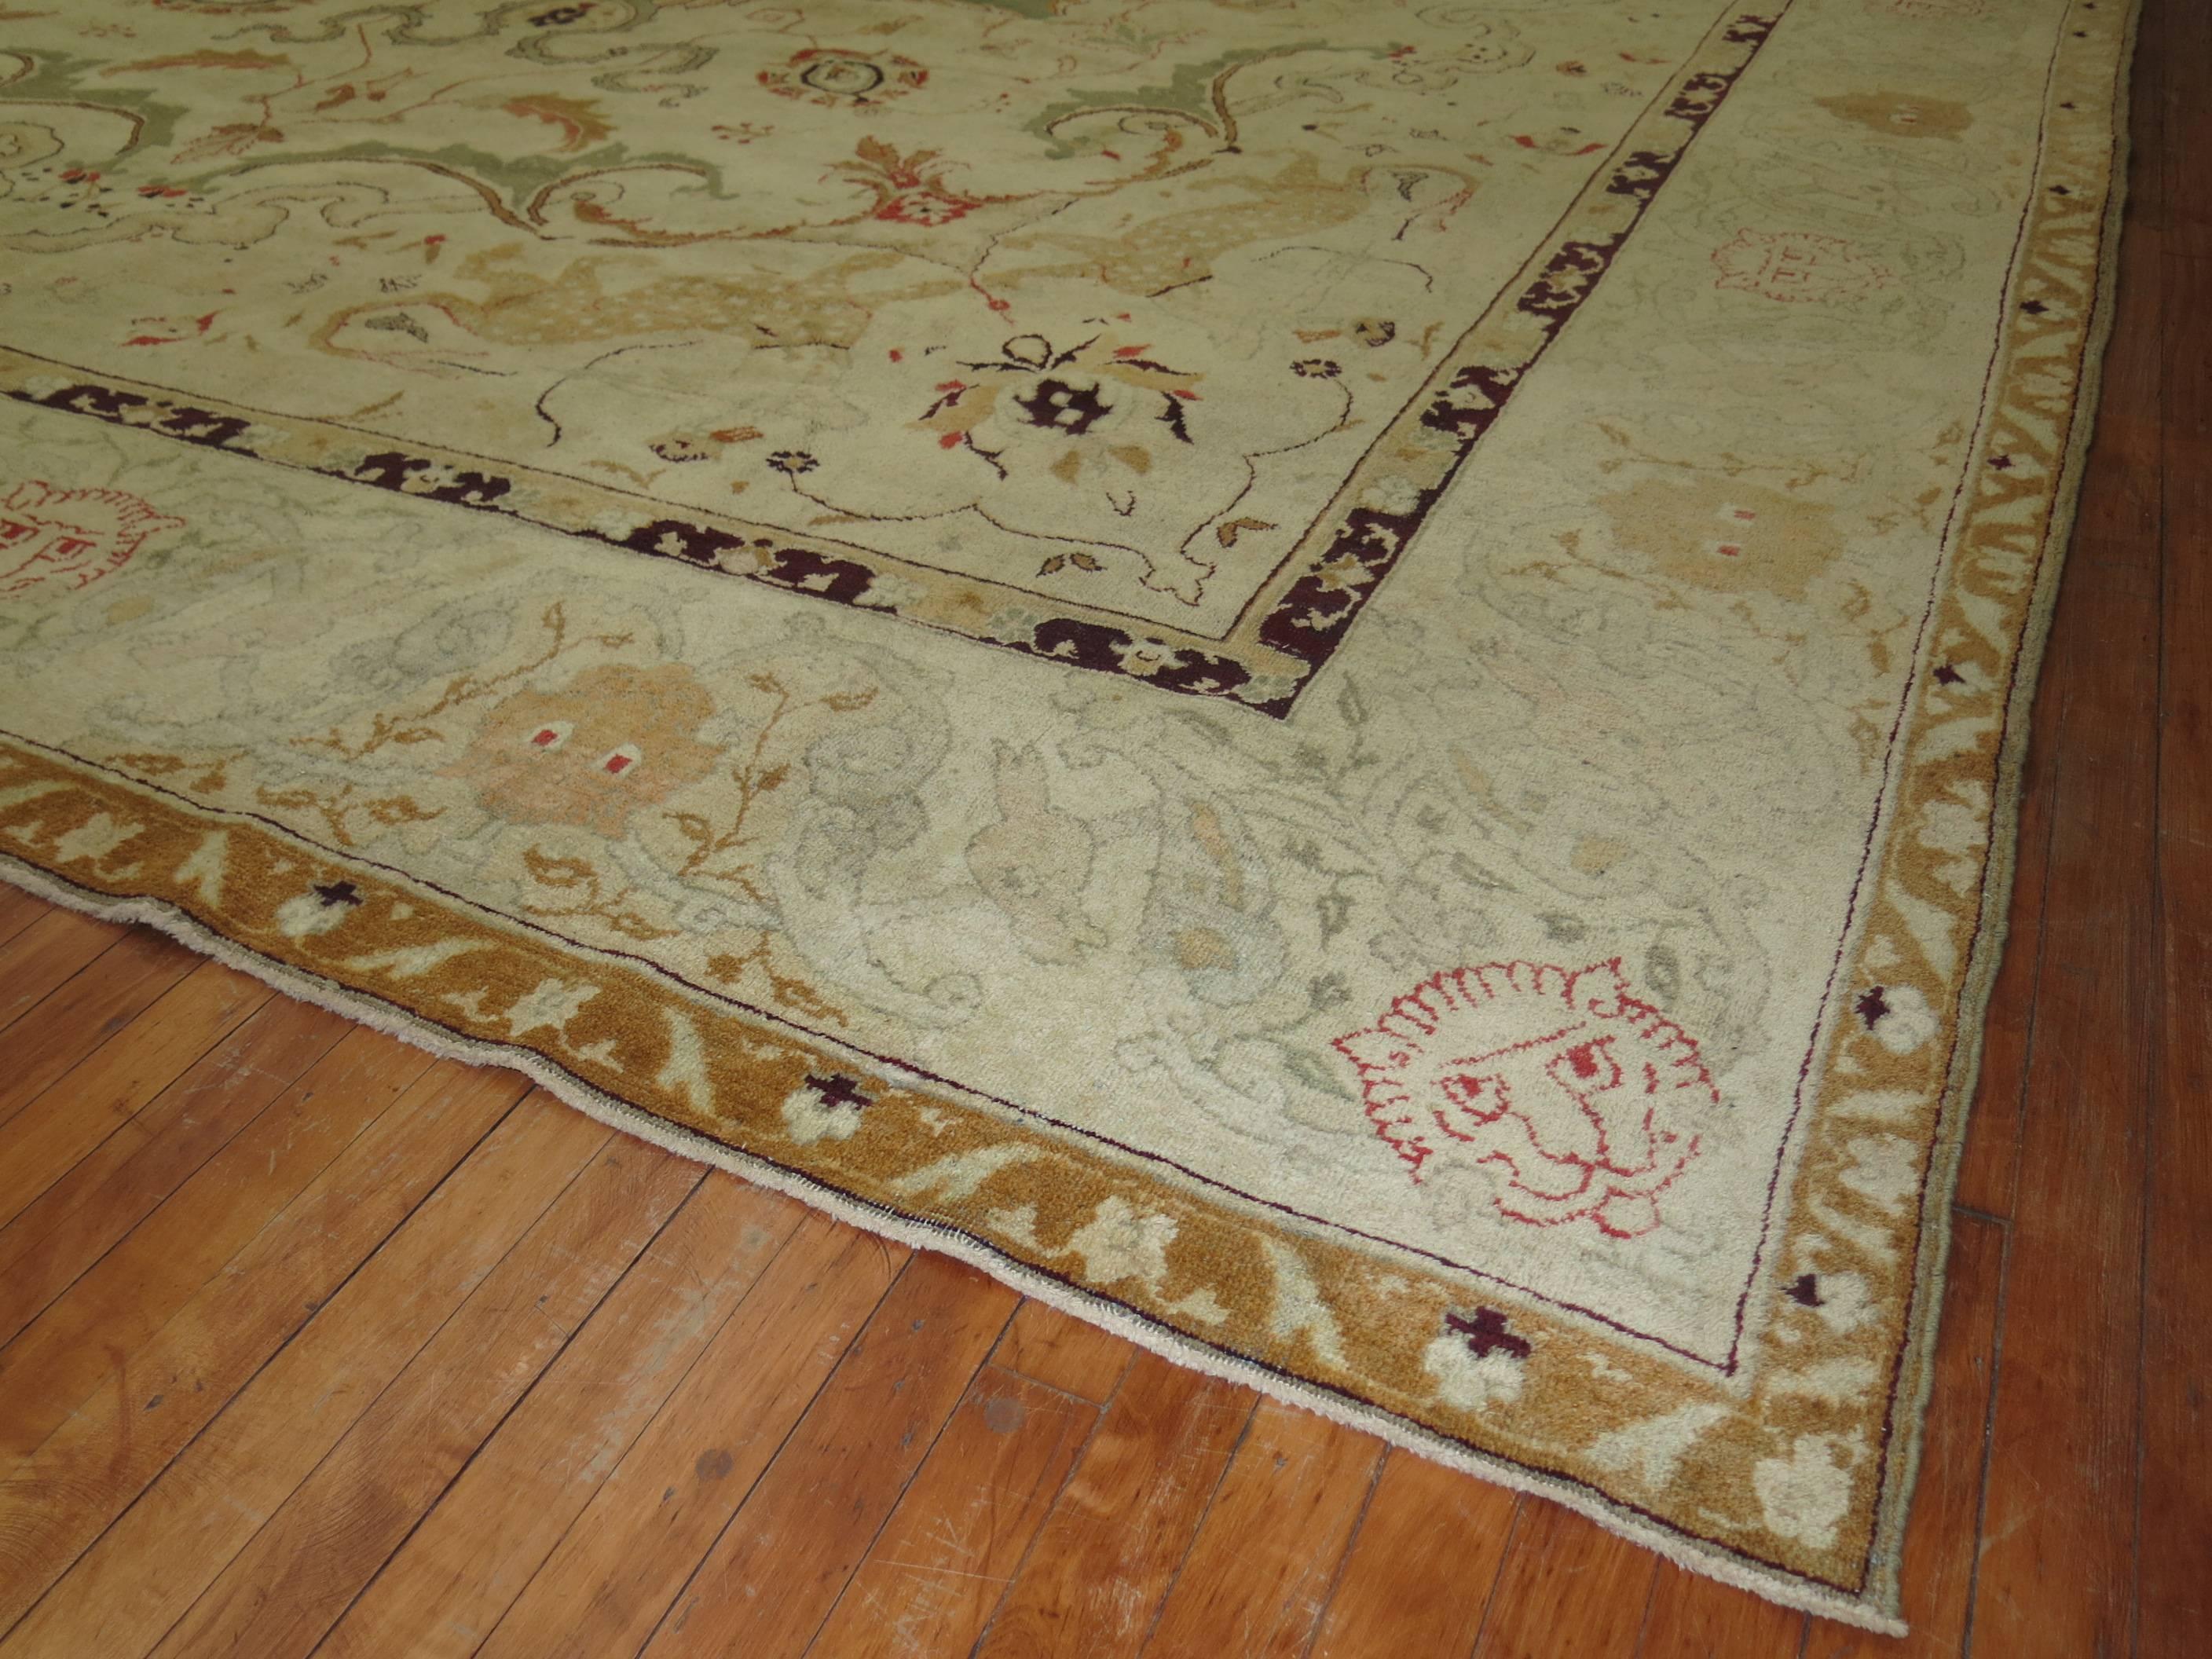 A stunning late 19th-early 20th century Antique Indian Agra carpet. Ivory field with predominant accents in gold, green and burgundy.

Agra carpets combine the grandeur and grace of well-known Persian court antique carpet designs with new motifs